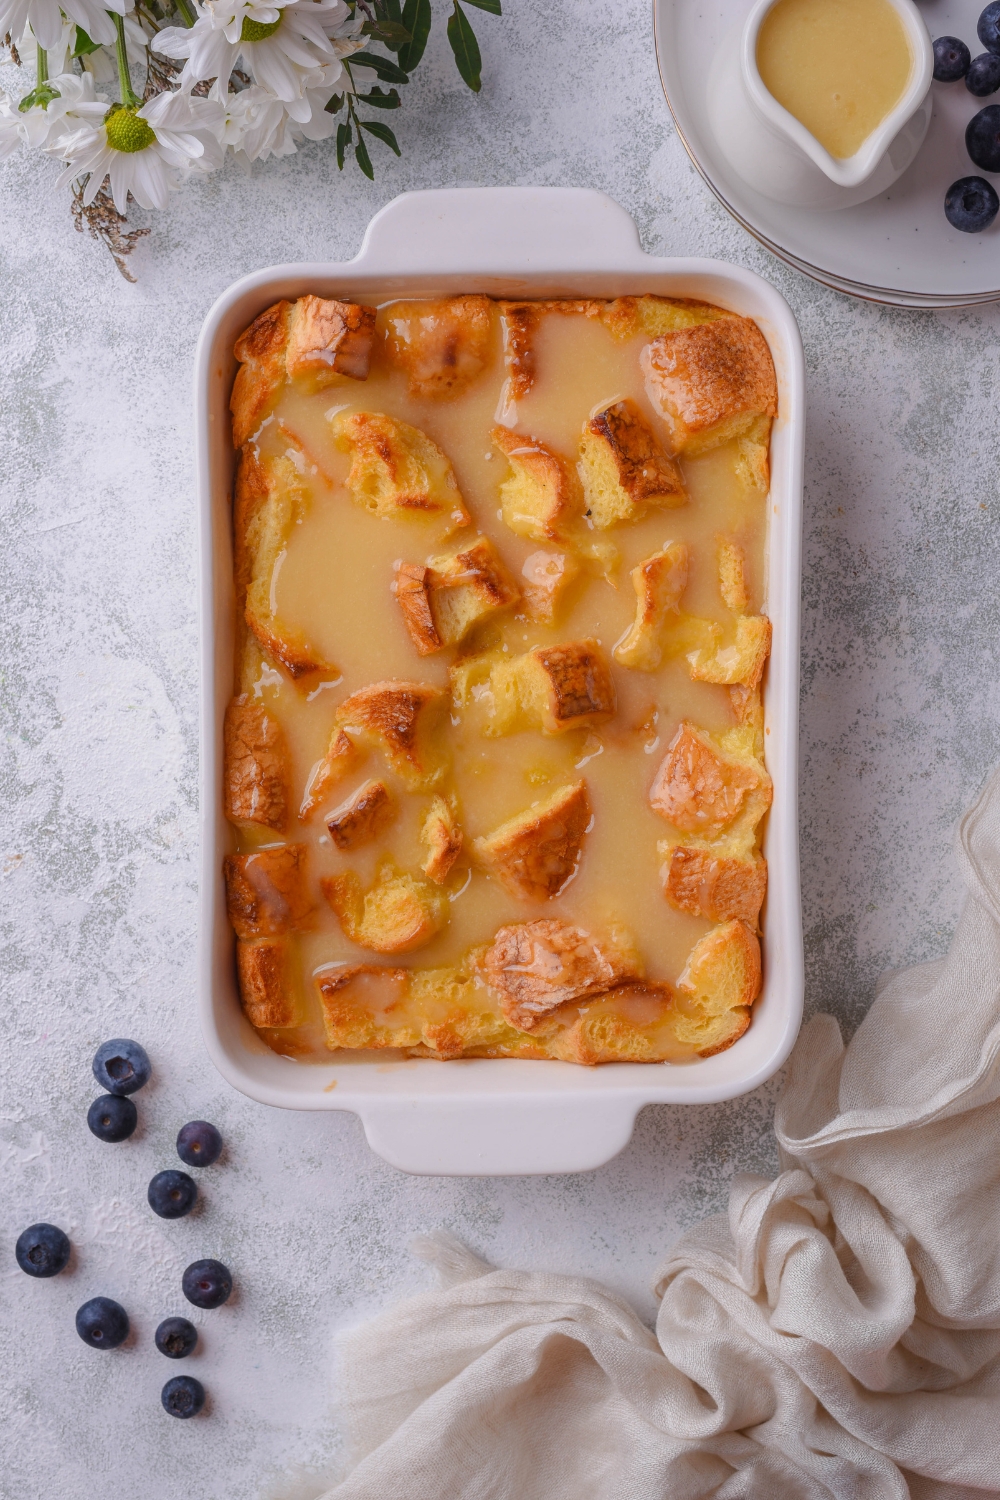 Bread pudding in a white baking tray, part of a pitcher of vanilla sauce is on the side.